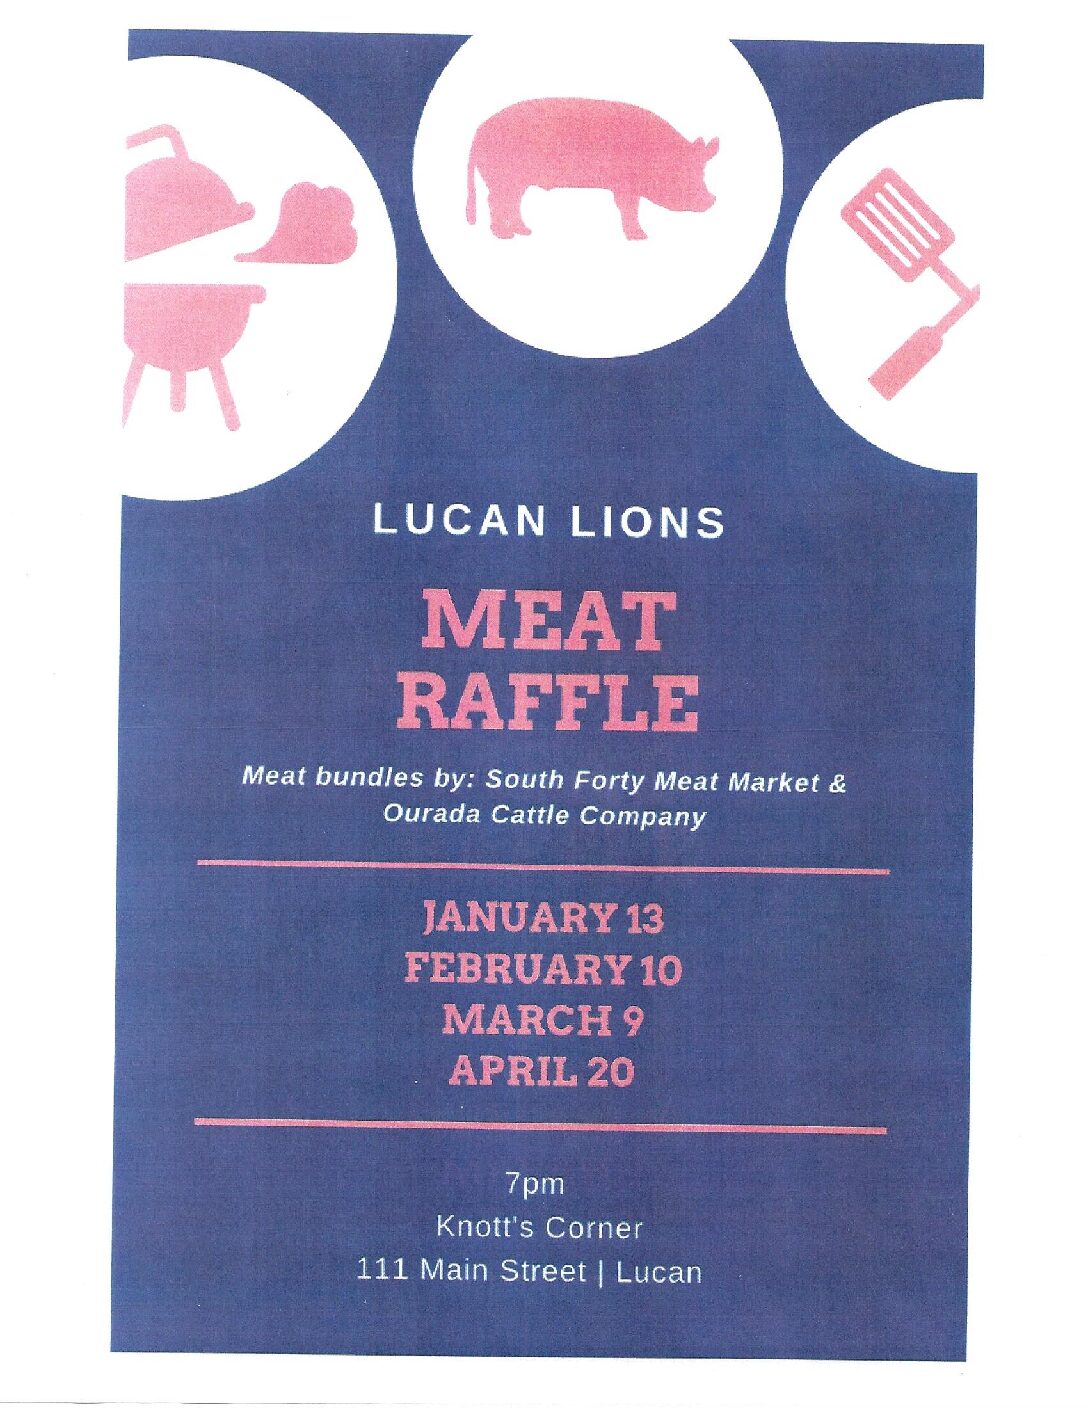 <h1 class="tribe-events-single-event-title">Lucan Lions Meat Raffle</h1>